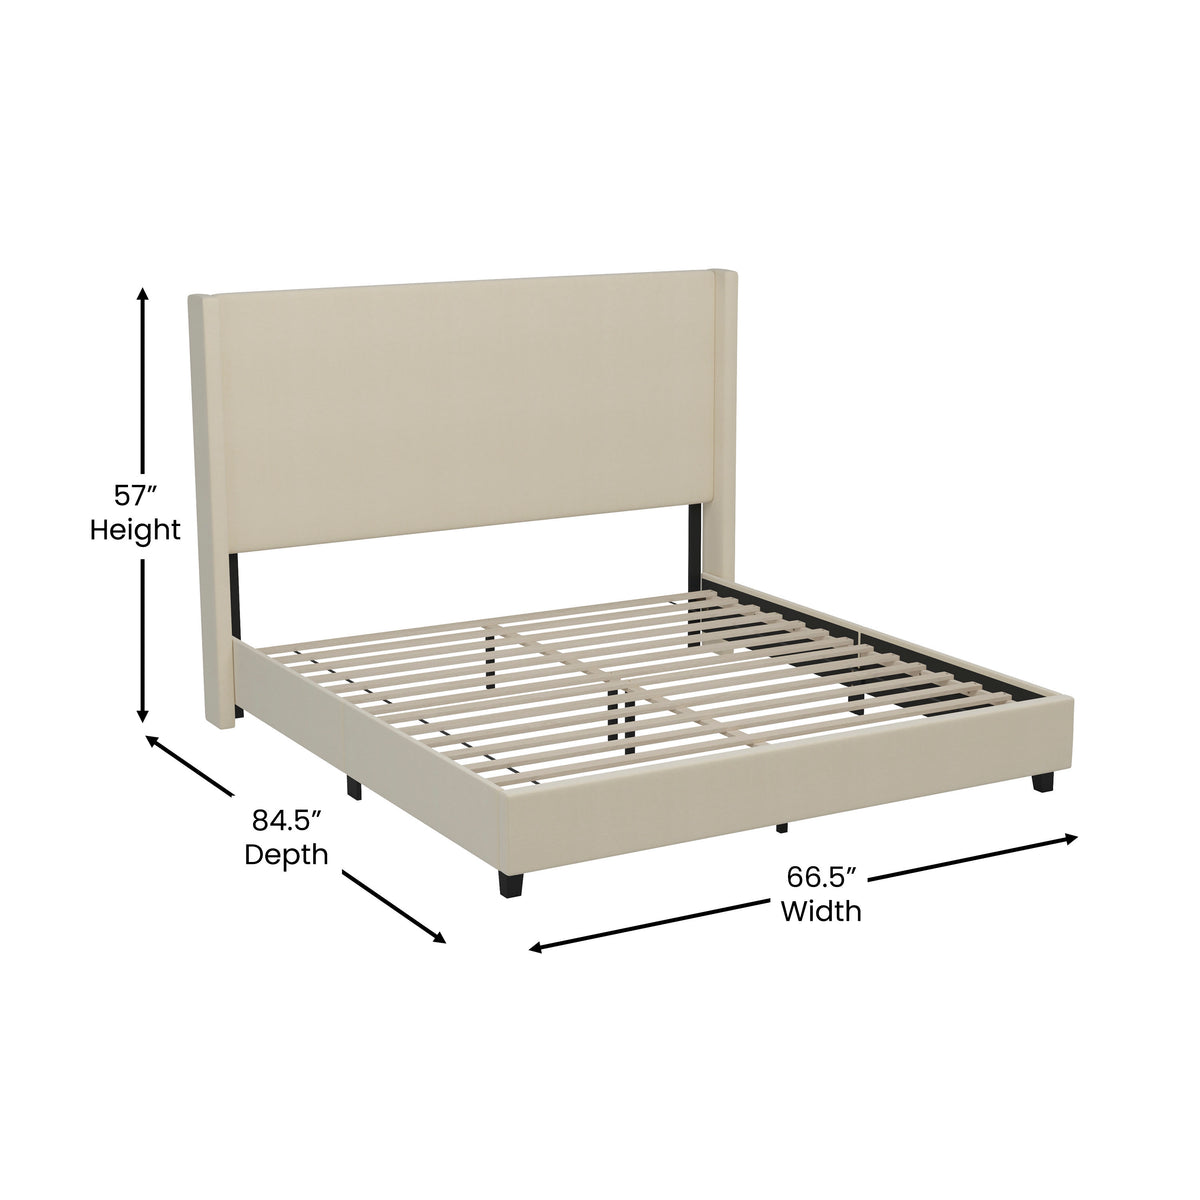 Beige,Queen |#| Queen Size Upholstered Platform Bed with Channel Stitched Headboard in Beige